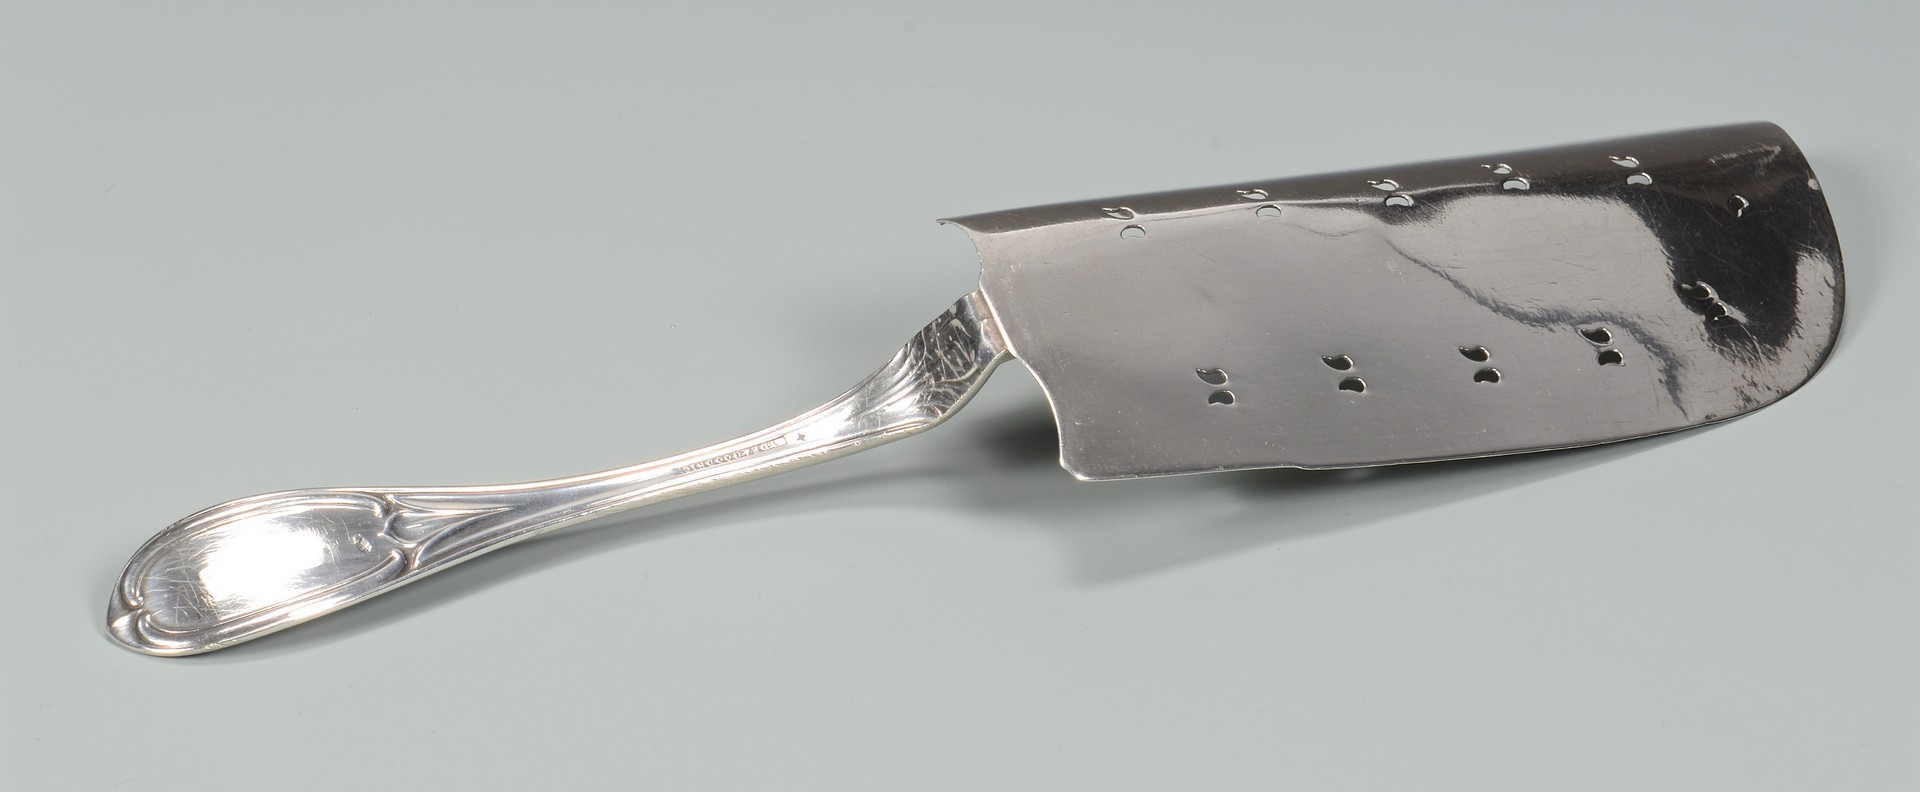 Lot 88: Hyde & Goodrich Coin Fish Slice, New Orleans